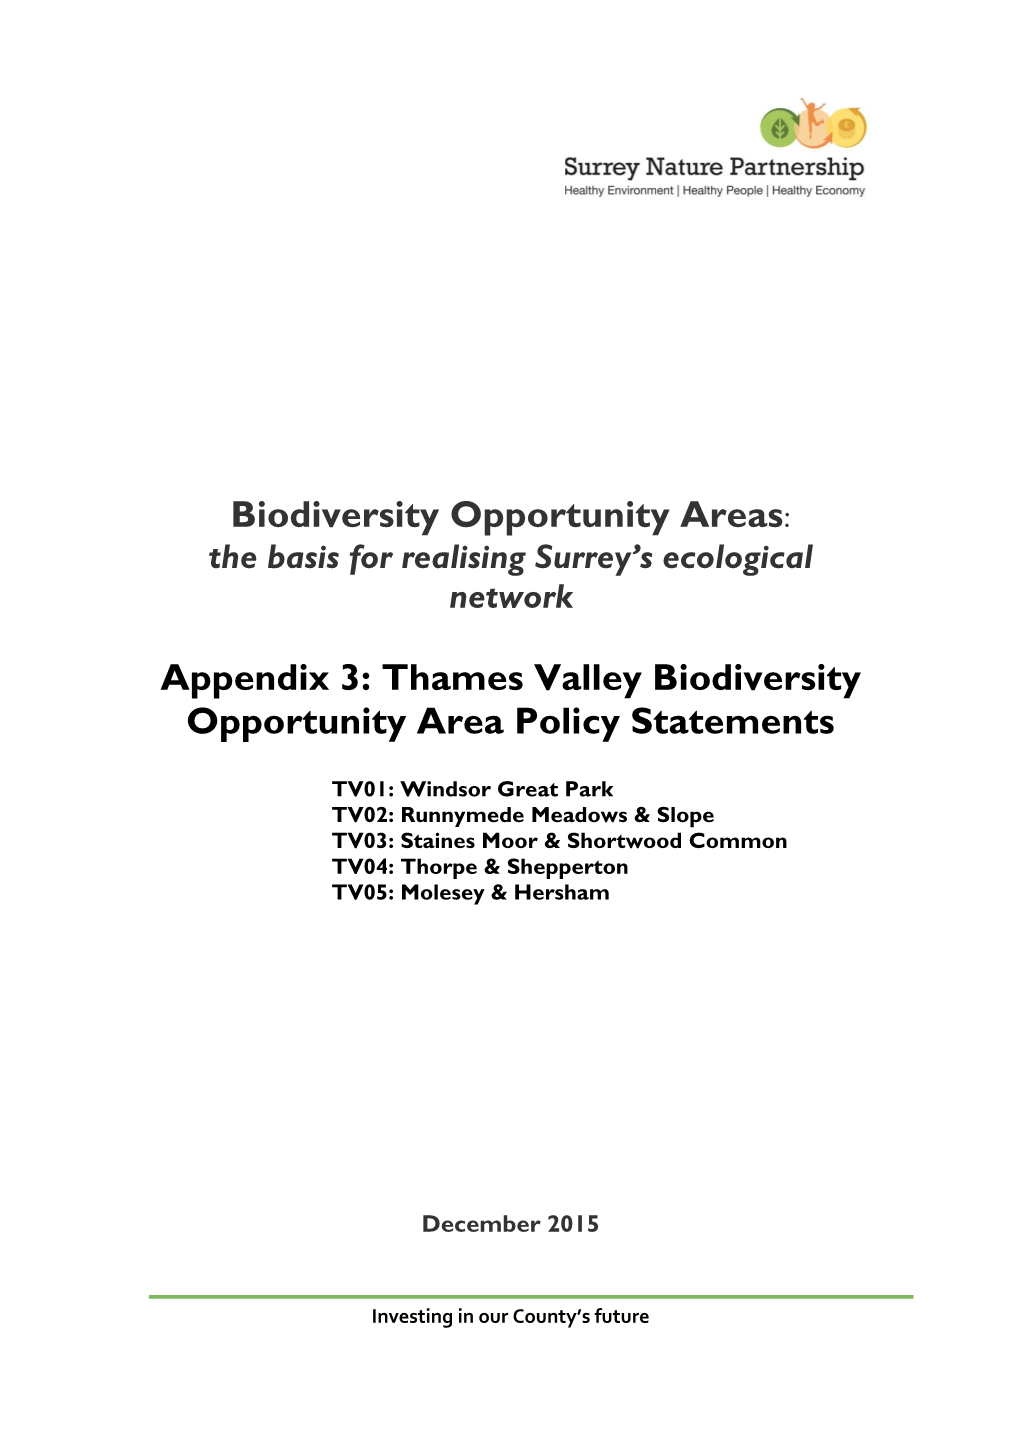 Thames Valley Biodiversity Opportunity Area Policy Statements